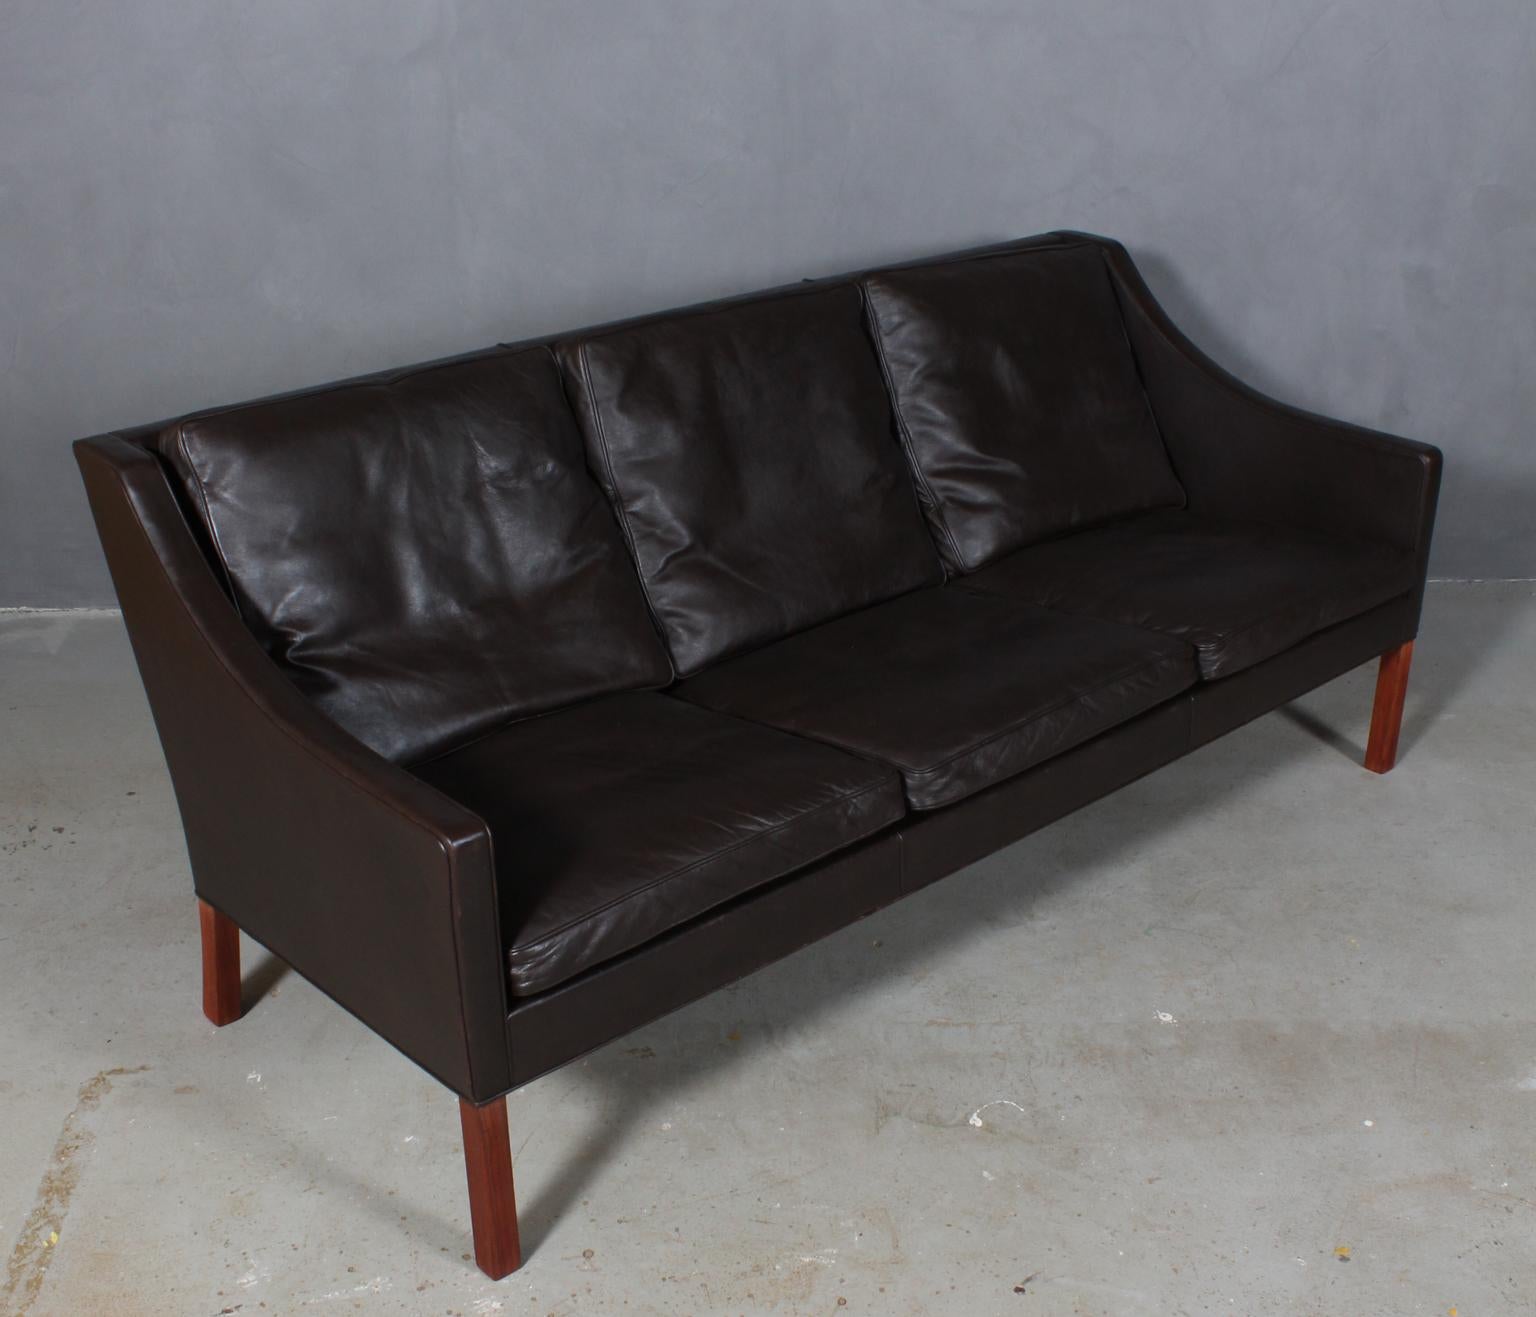 Børge Mogensen three-seat sofa original upholstered in patinated brown leather.

Legs of mahogany.

Model 2209, made by Fredericia Furniture.